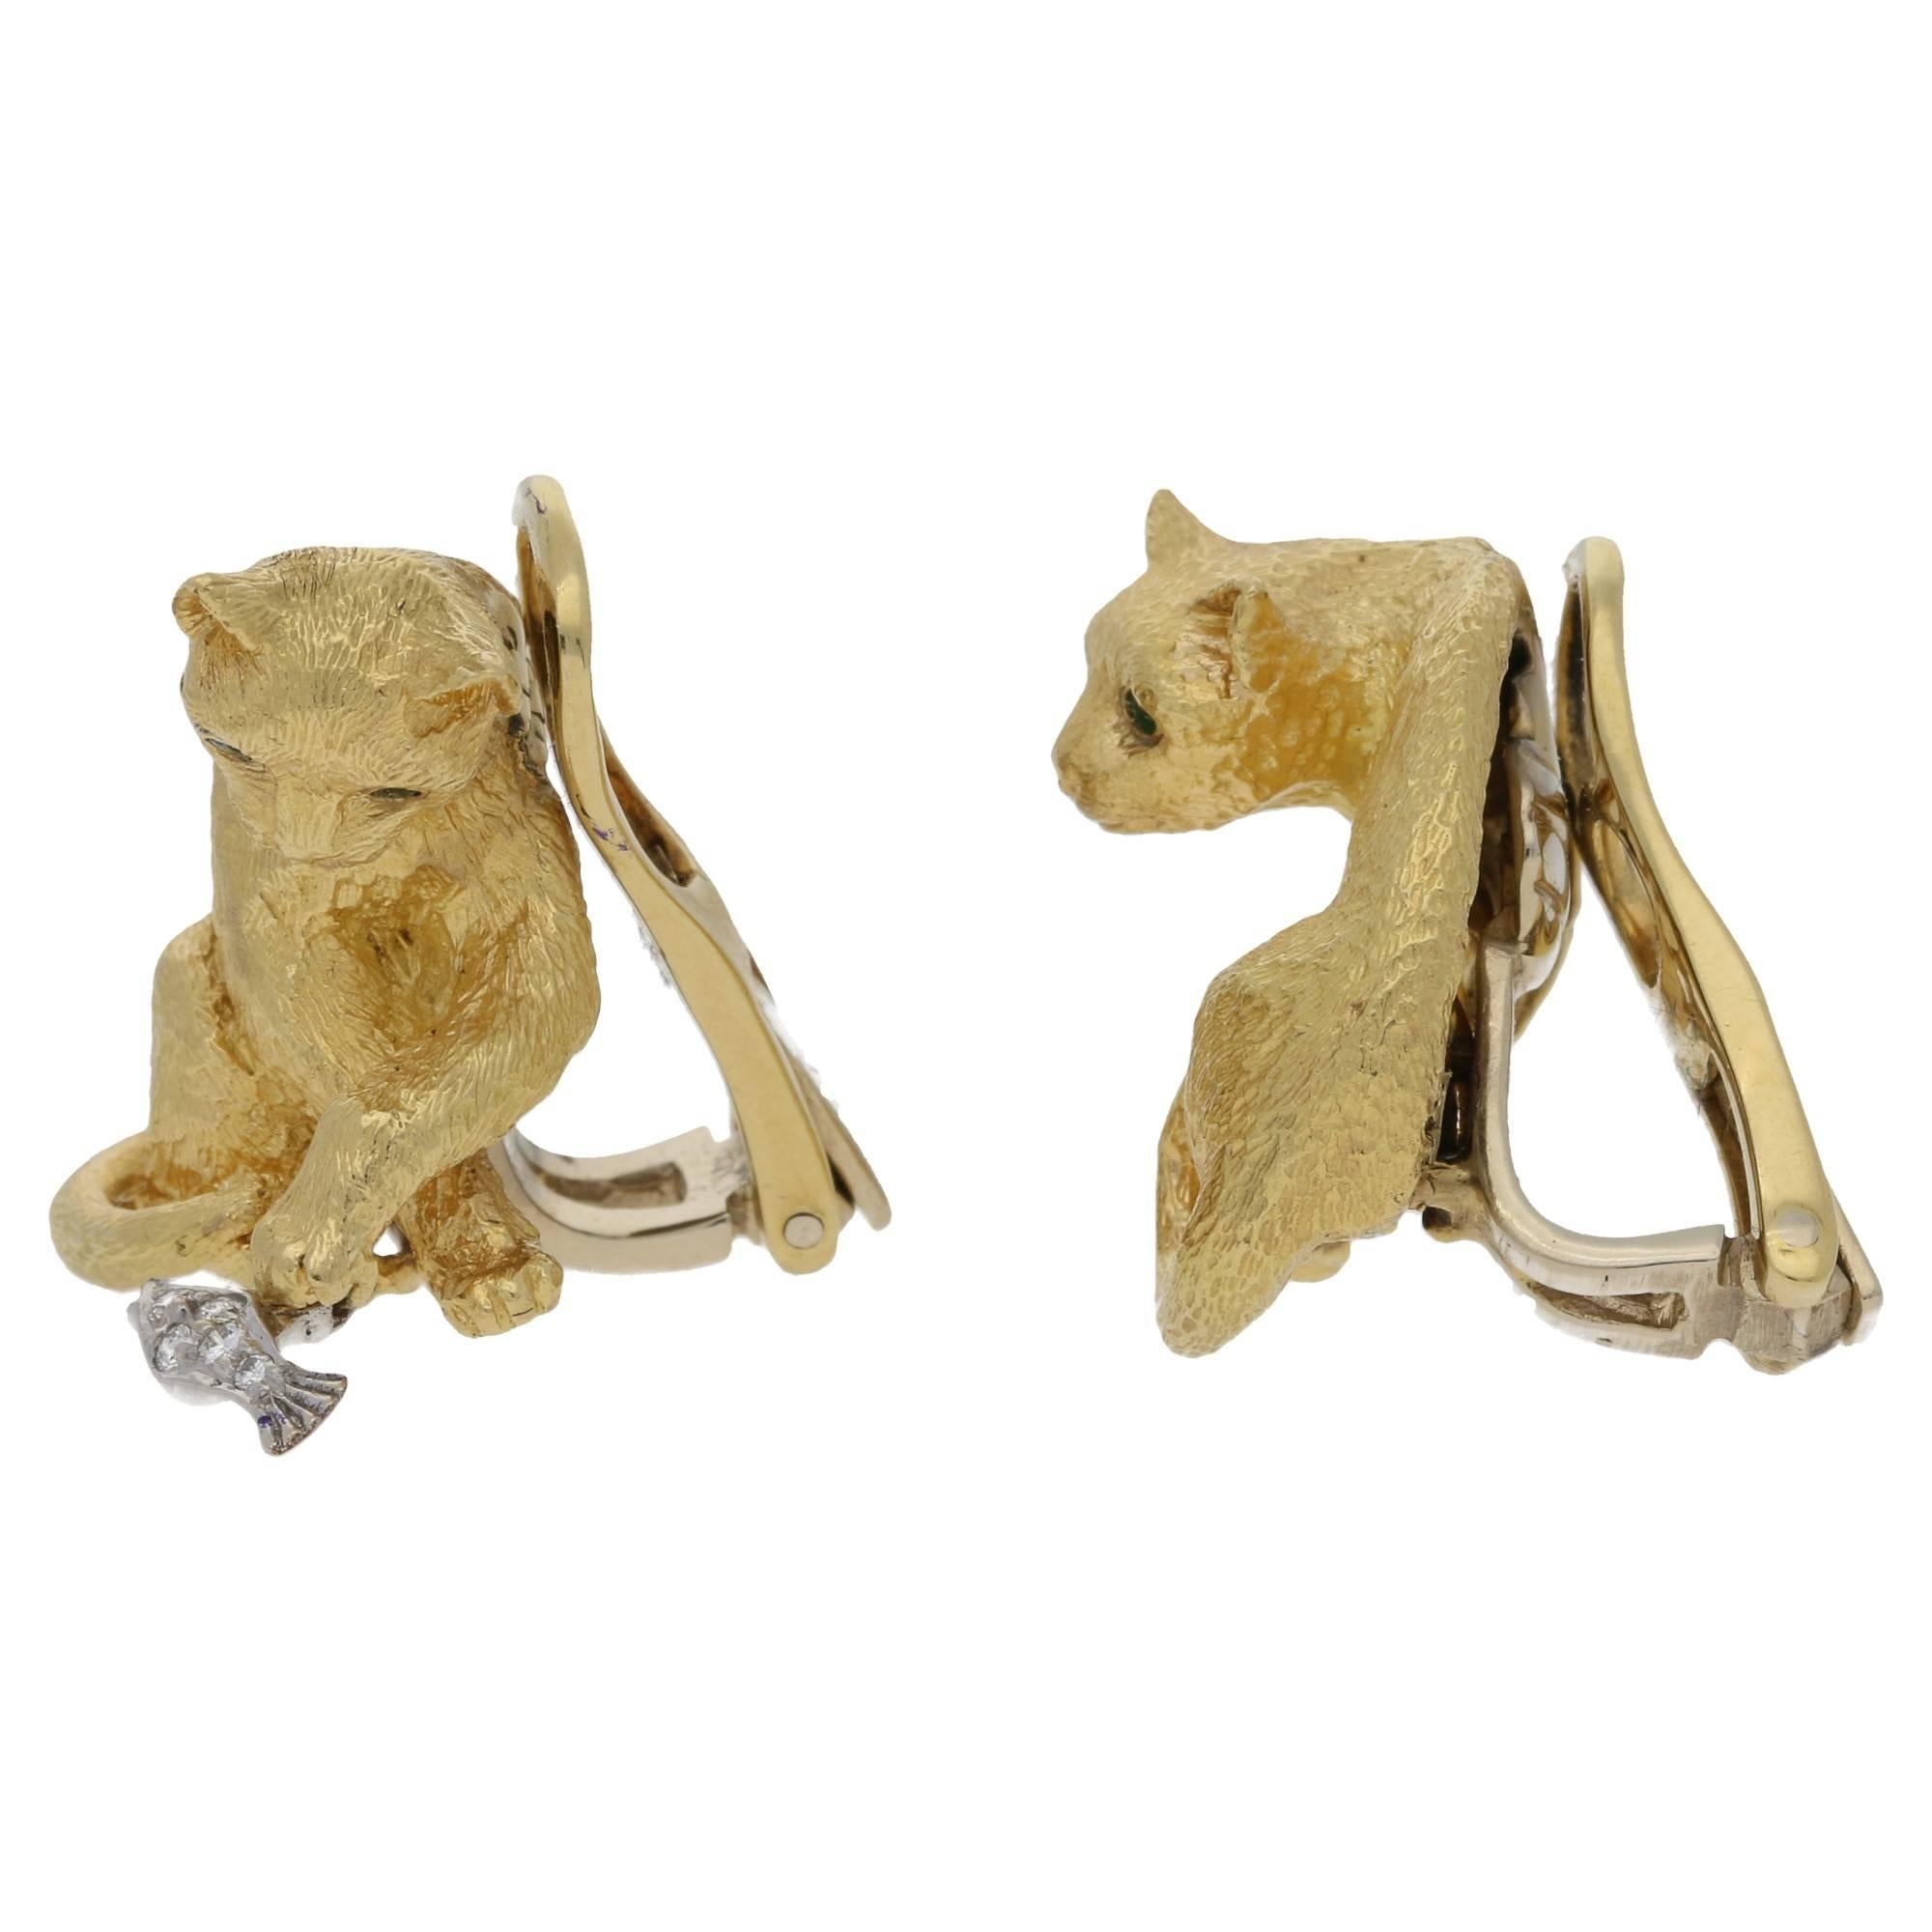 A fine pair of Tiffany 18k yellow gold cat earrings. These rare earrings take the form of two cats, one detailed with a diamond articulated fish in a white gold setting, the other a cat playing with a ball. The ball taking the form of a round